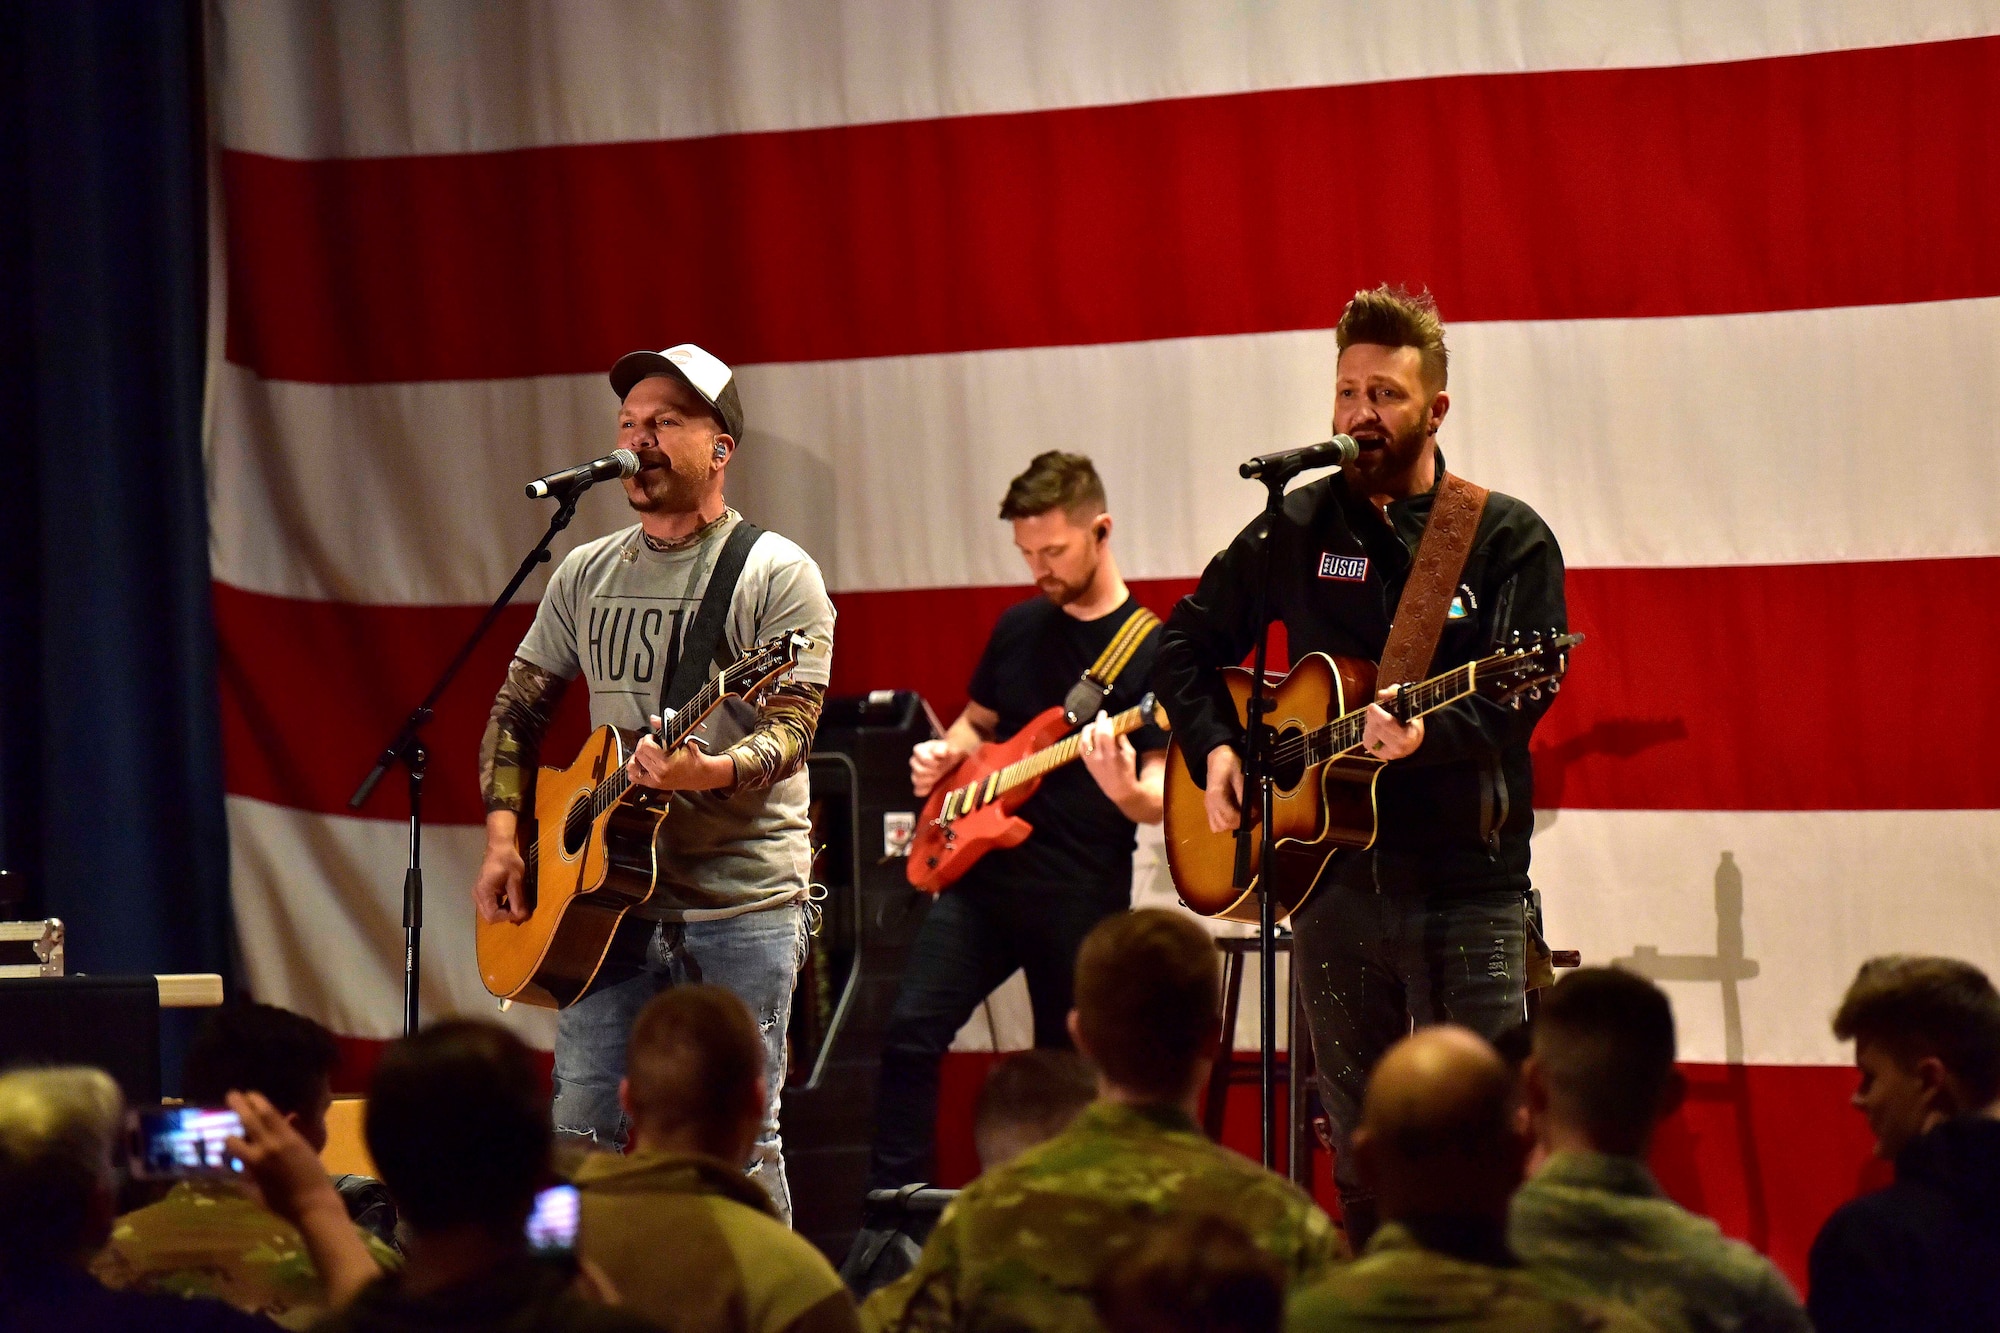 Country music duo LOCASH performs at a United Service Organizations show on Eielson Air Force Base Alaska, March 2, 2020. The USO tour featured other entertainers including Matt Walsh, an American comedian, Brad Morris, a film writer, Scot Armstrong, an American screenwriter, Ilima-Lei Macfarlane, Bellator Mixed Martial Arts Women’s Flyweight World Champion, and DJ J.Dayz. (U.S. Air Force photo by Senior Airman Beaux Hebert)